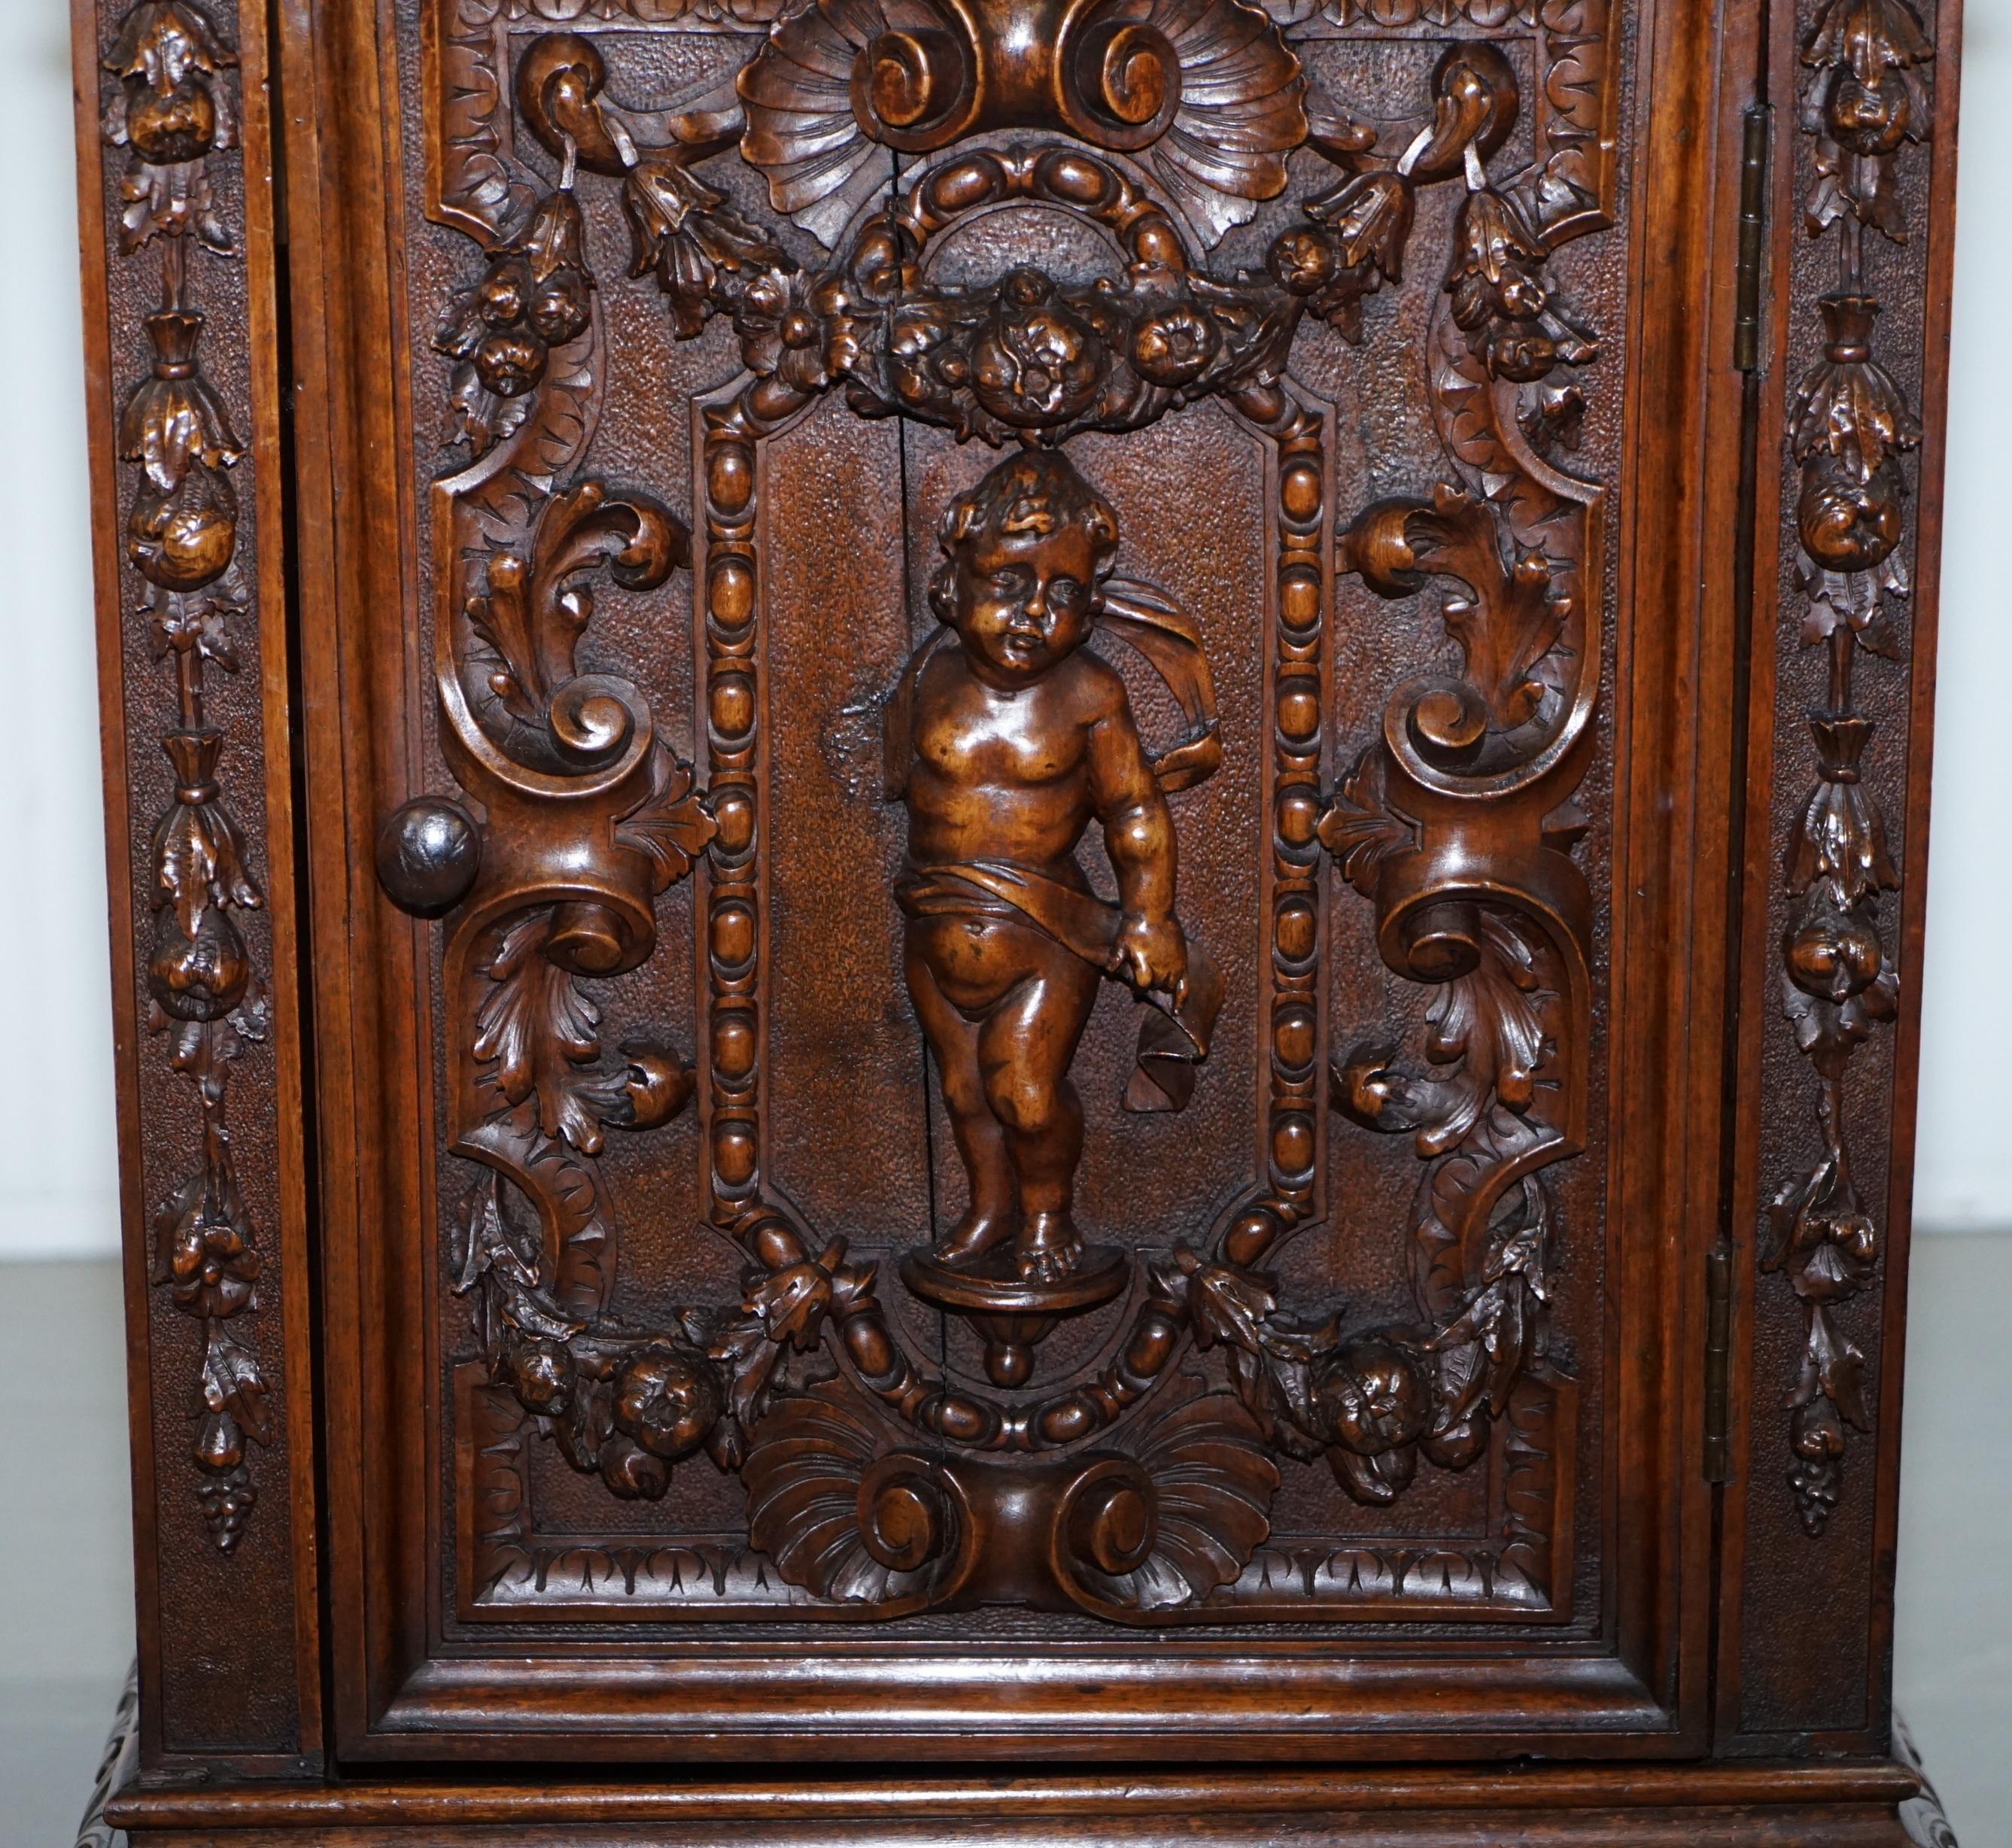 Late 18th Century Stunning circa 1780 Carved Walnut Side Cabinet with Cherub & Floral Detailing